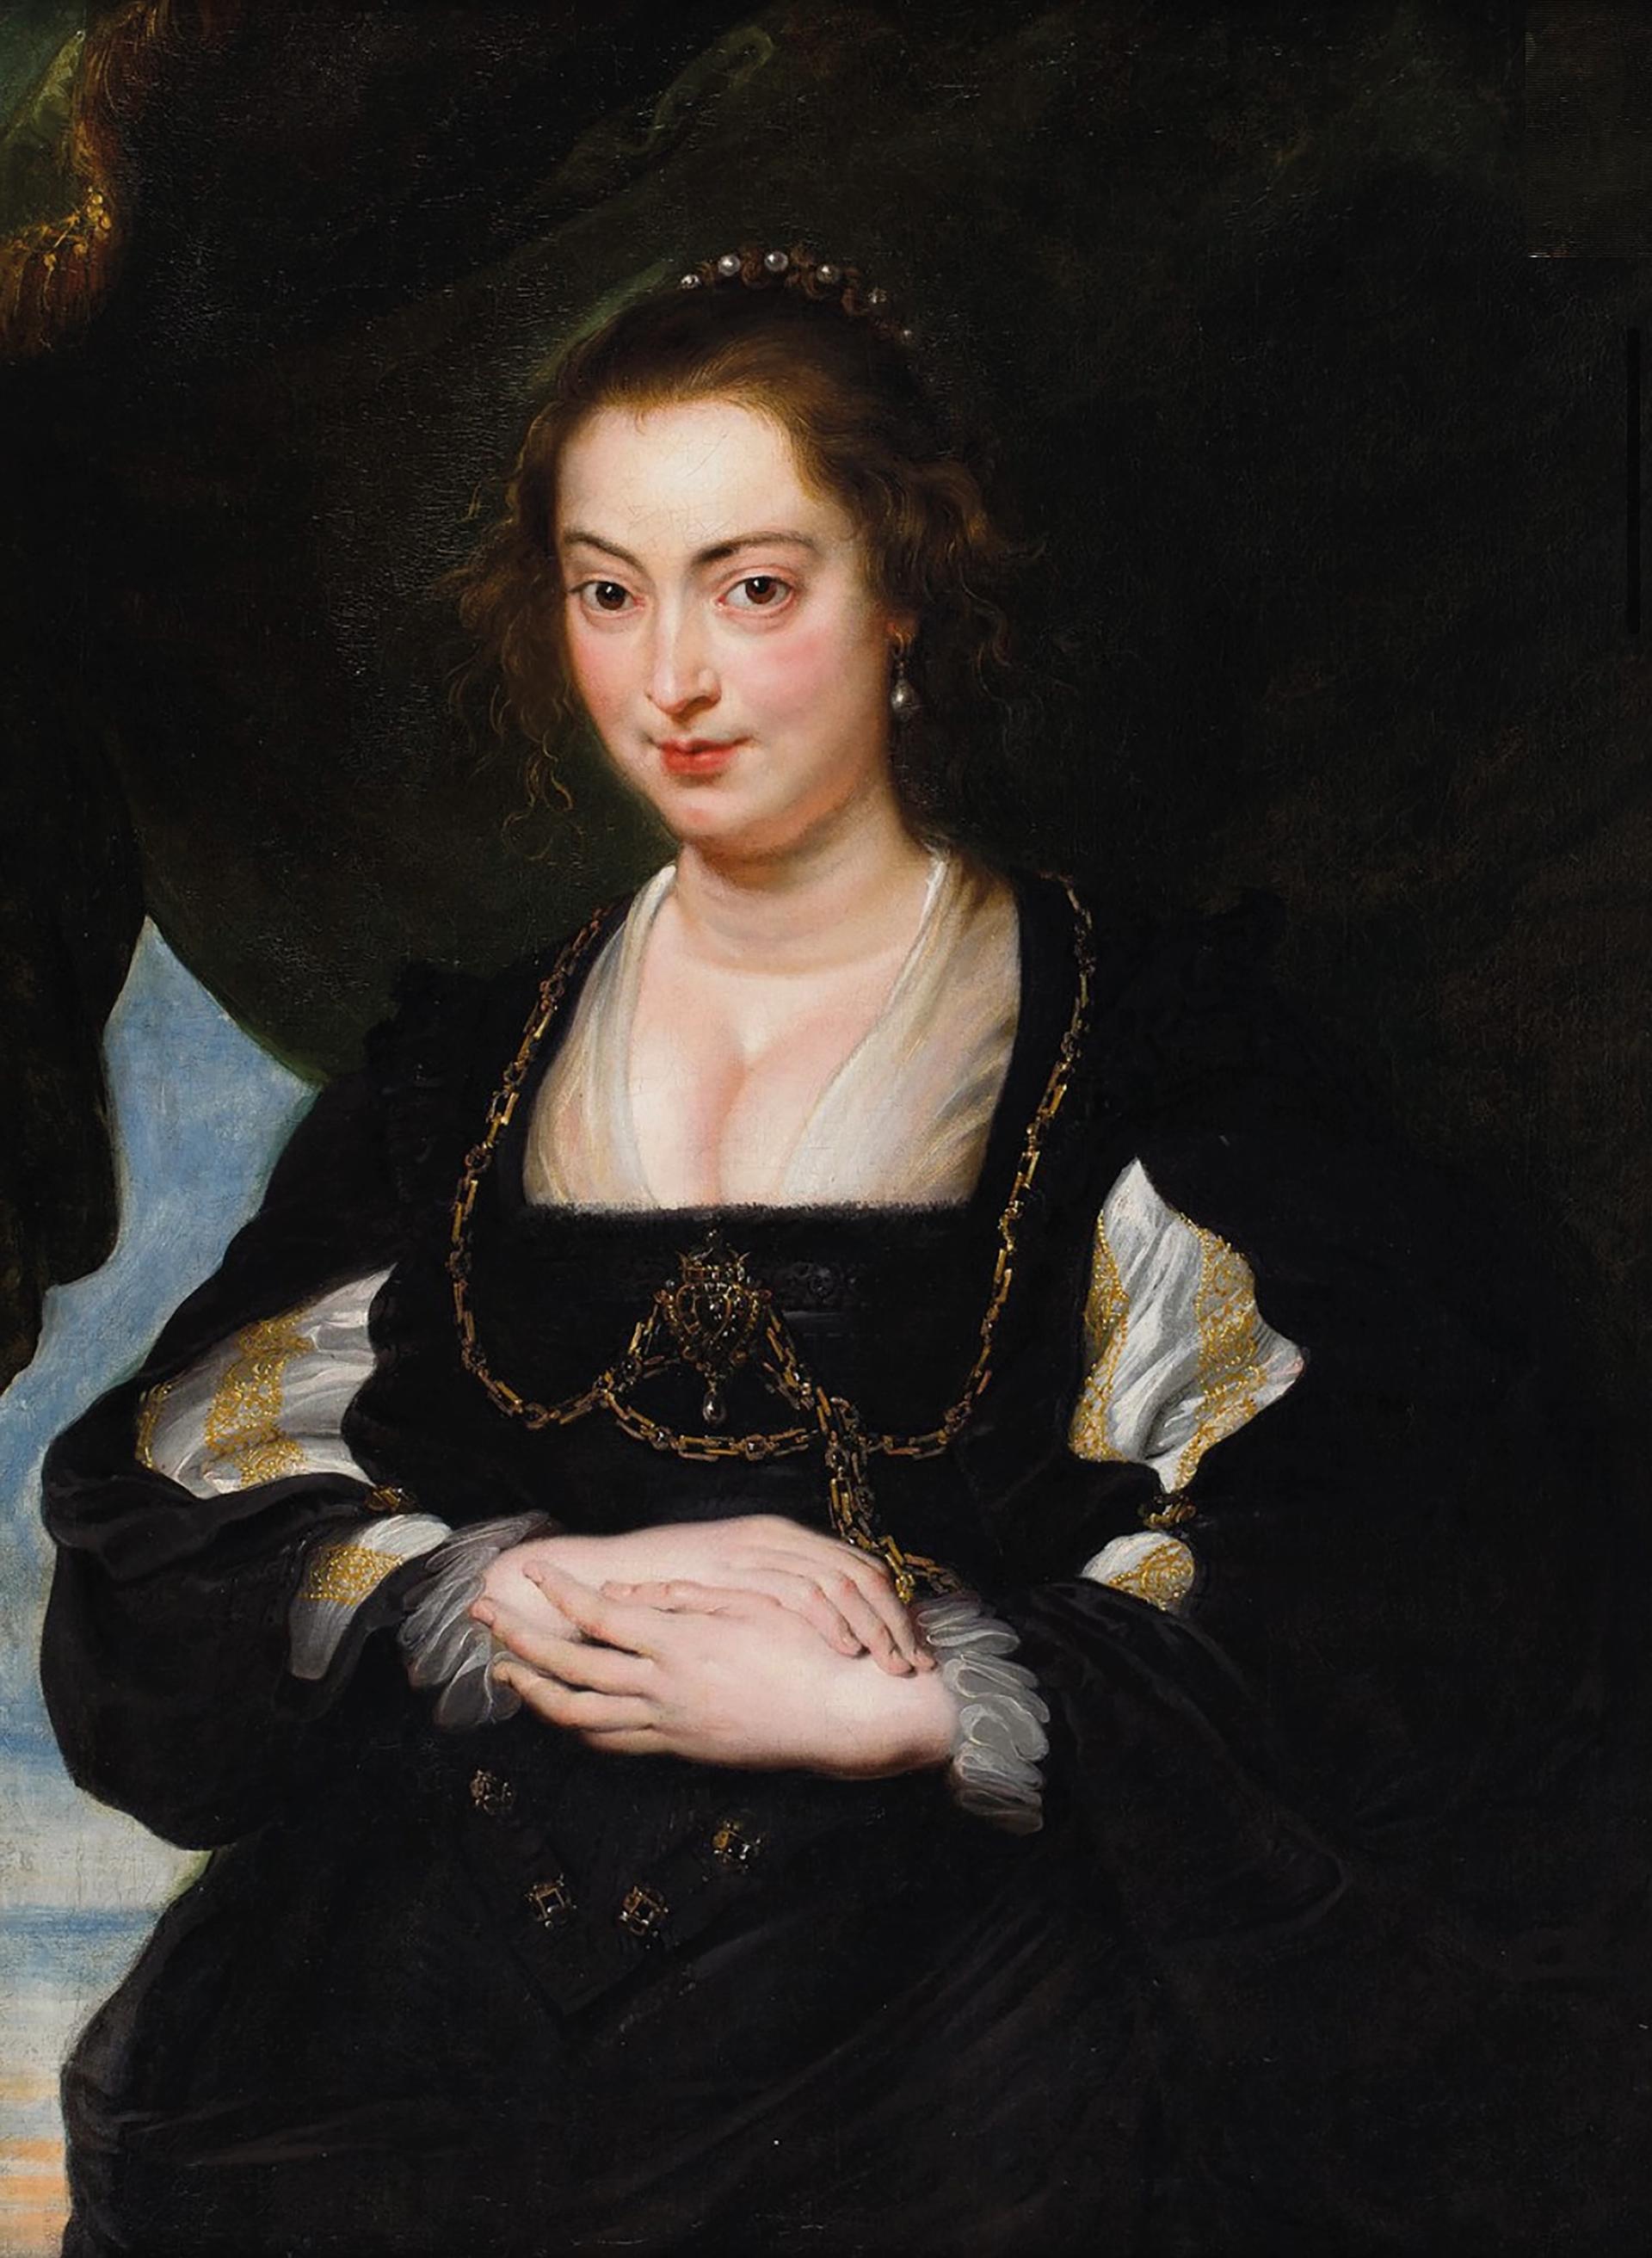 Peter Paul Rubens and workshop, The Portrait of a Lady (around 1620-25)

Courtesy of DesaUnicum